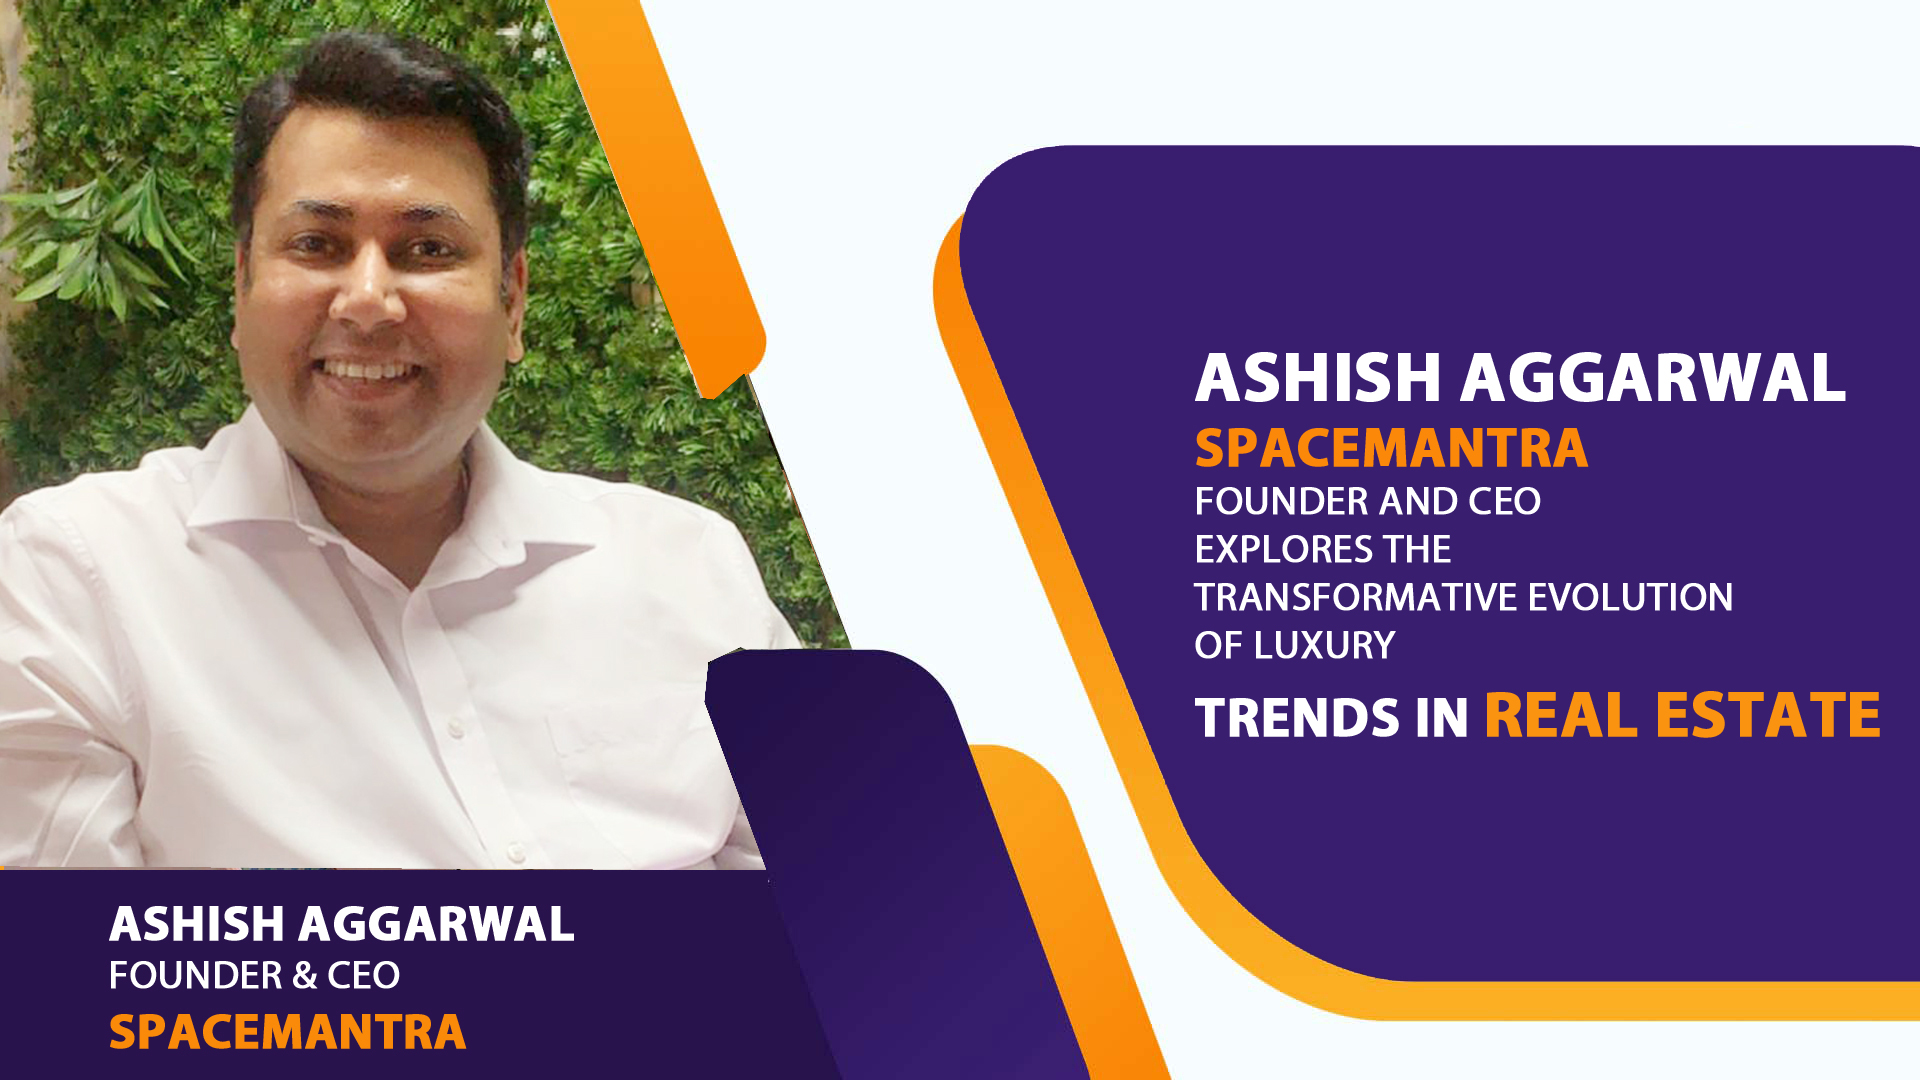 Ashish Aggarwal, SpaceMantra's Founder and CEO, Explores the Transformative Evolution of Luxury Trends in Real Estate